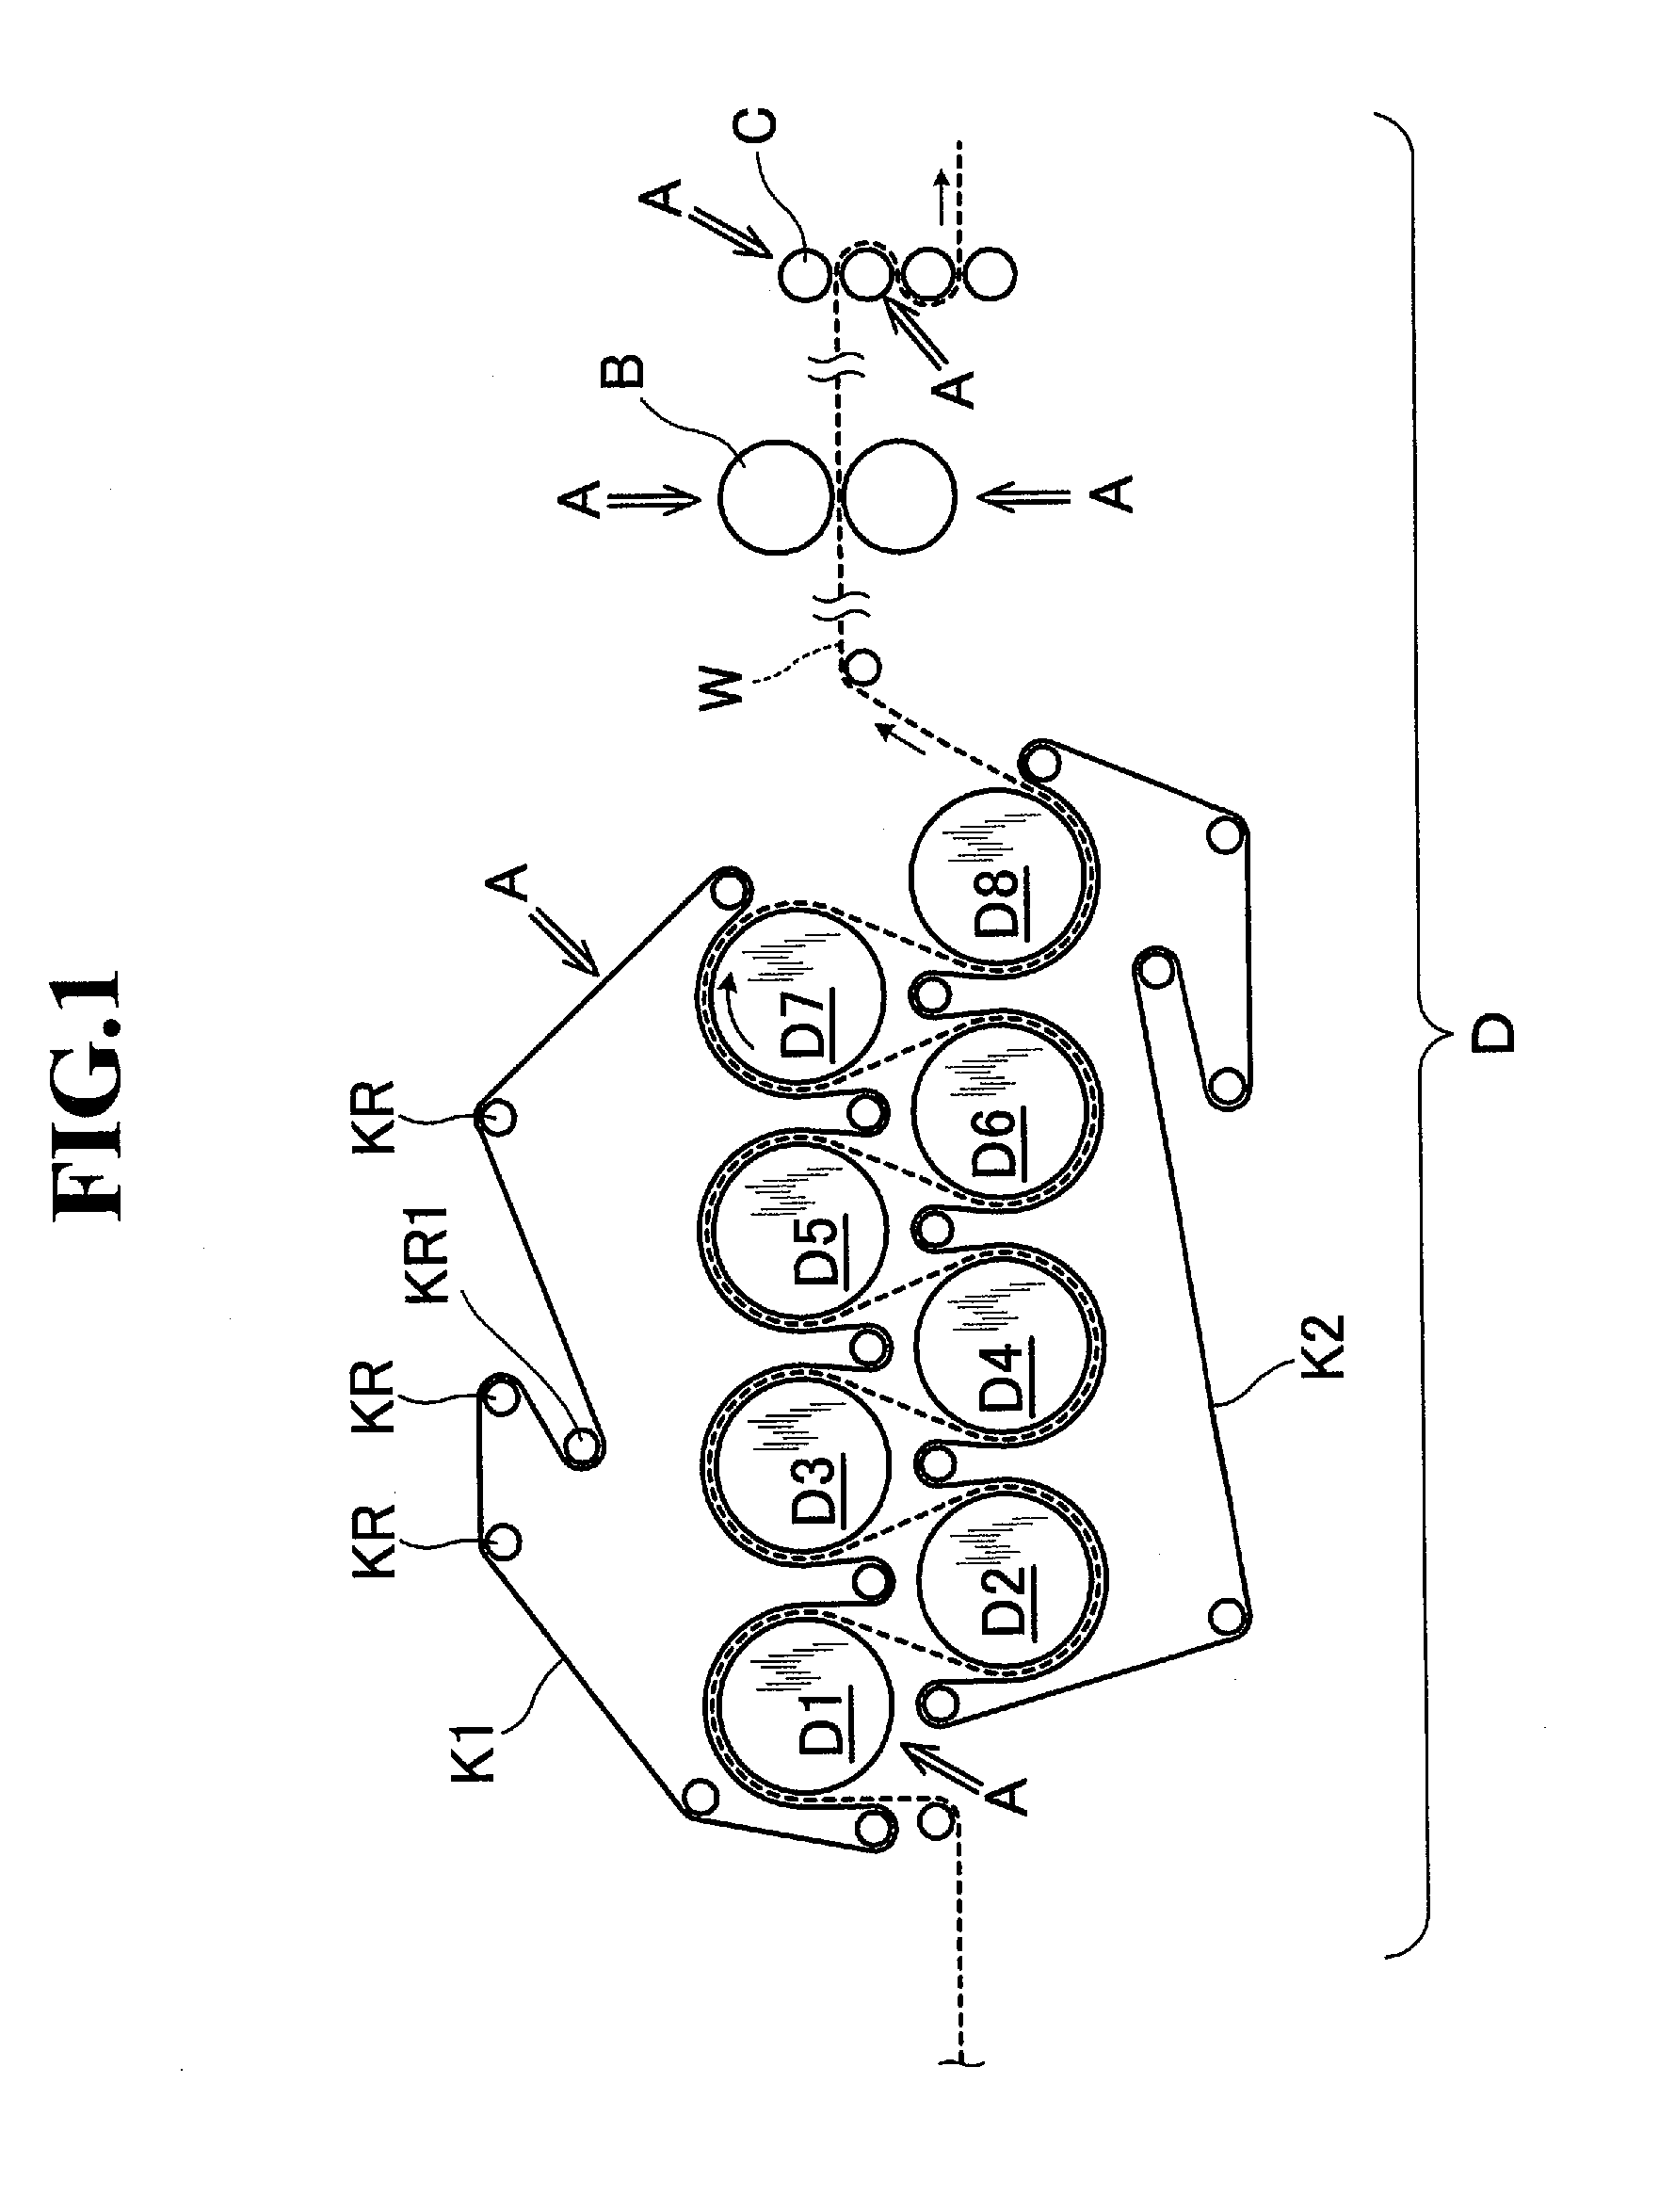 Method of using an Anti-soiling agent composition